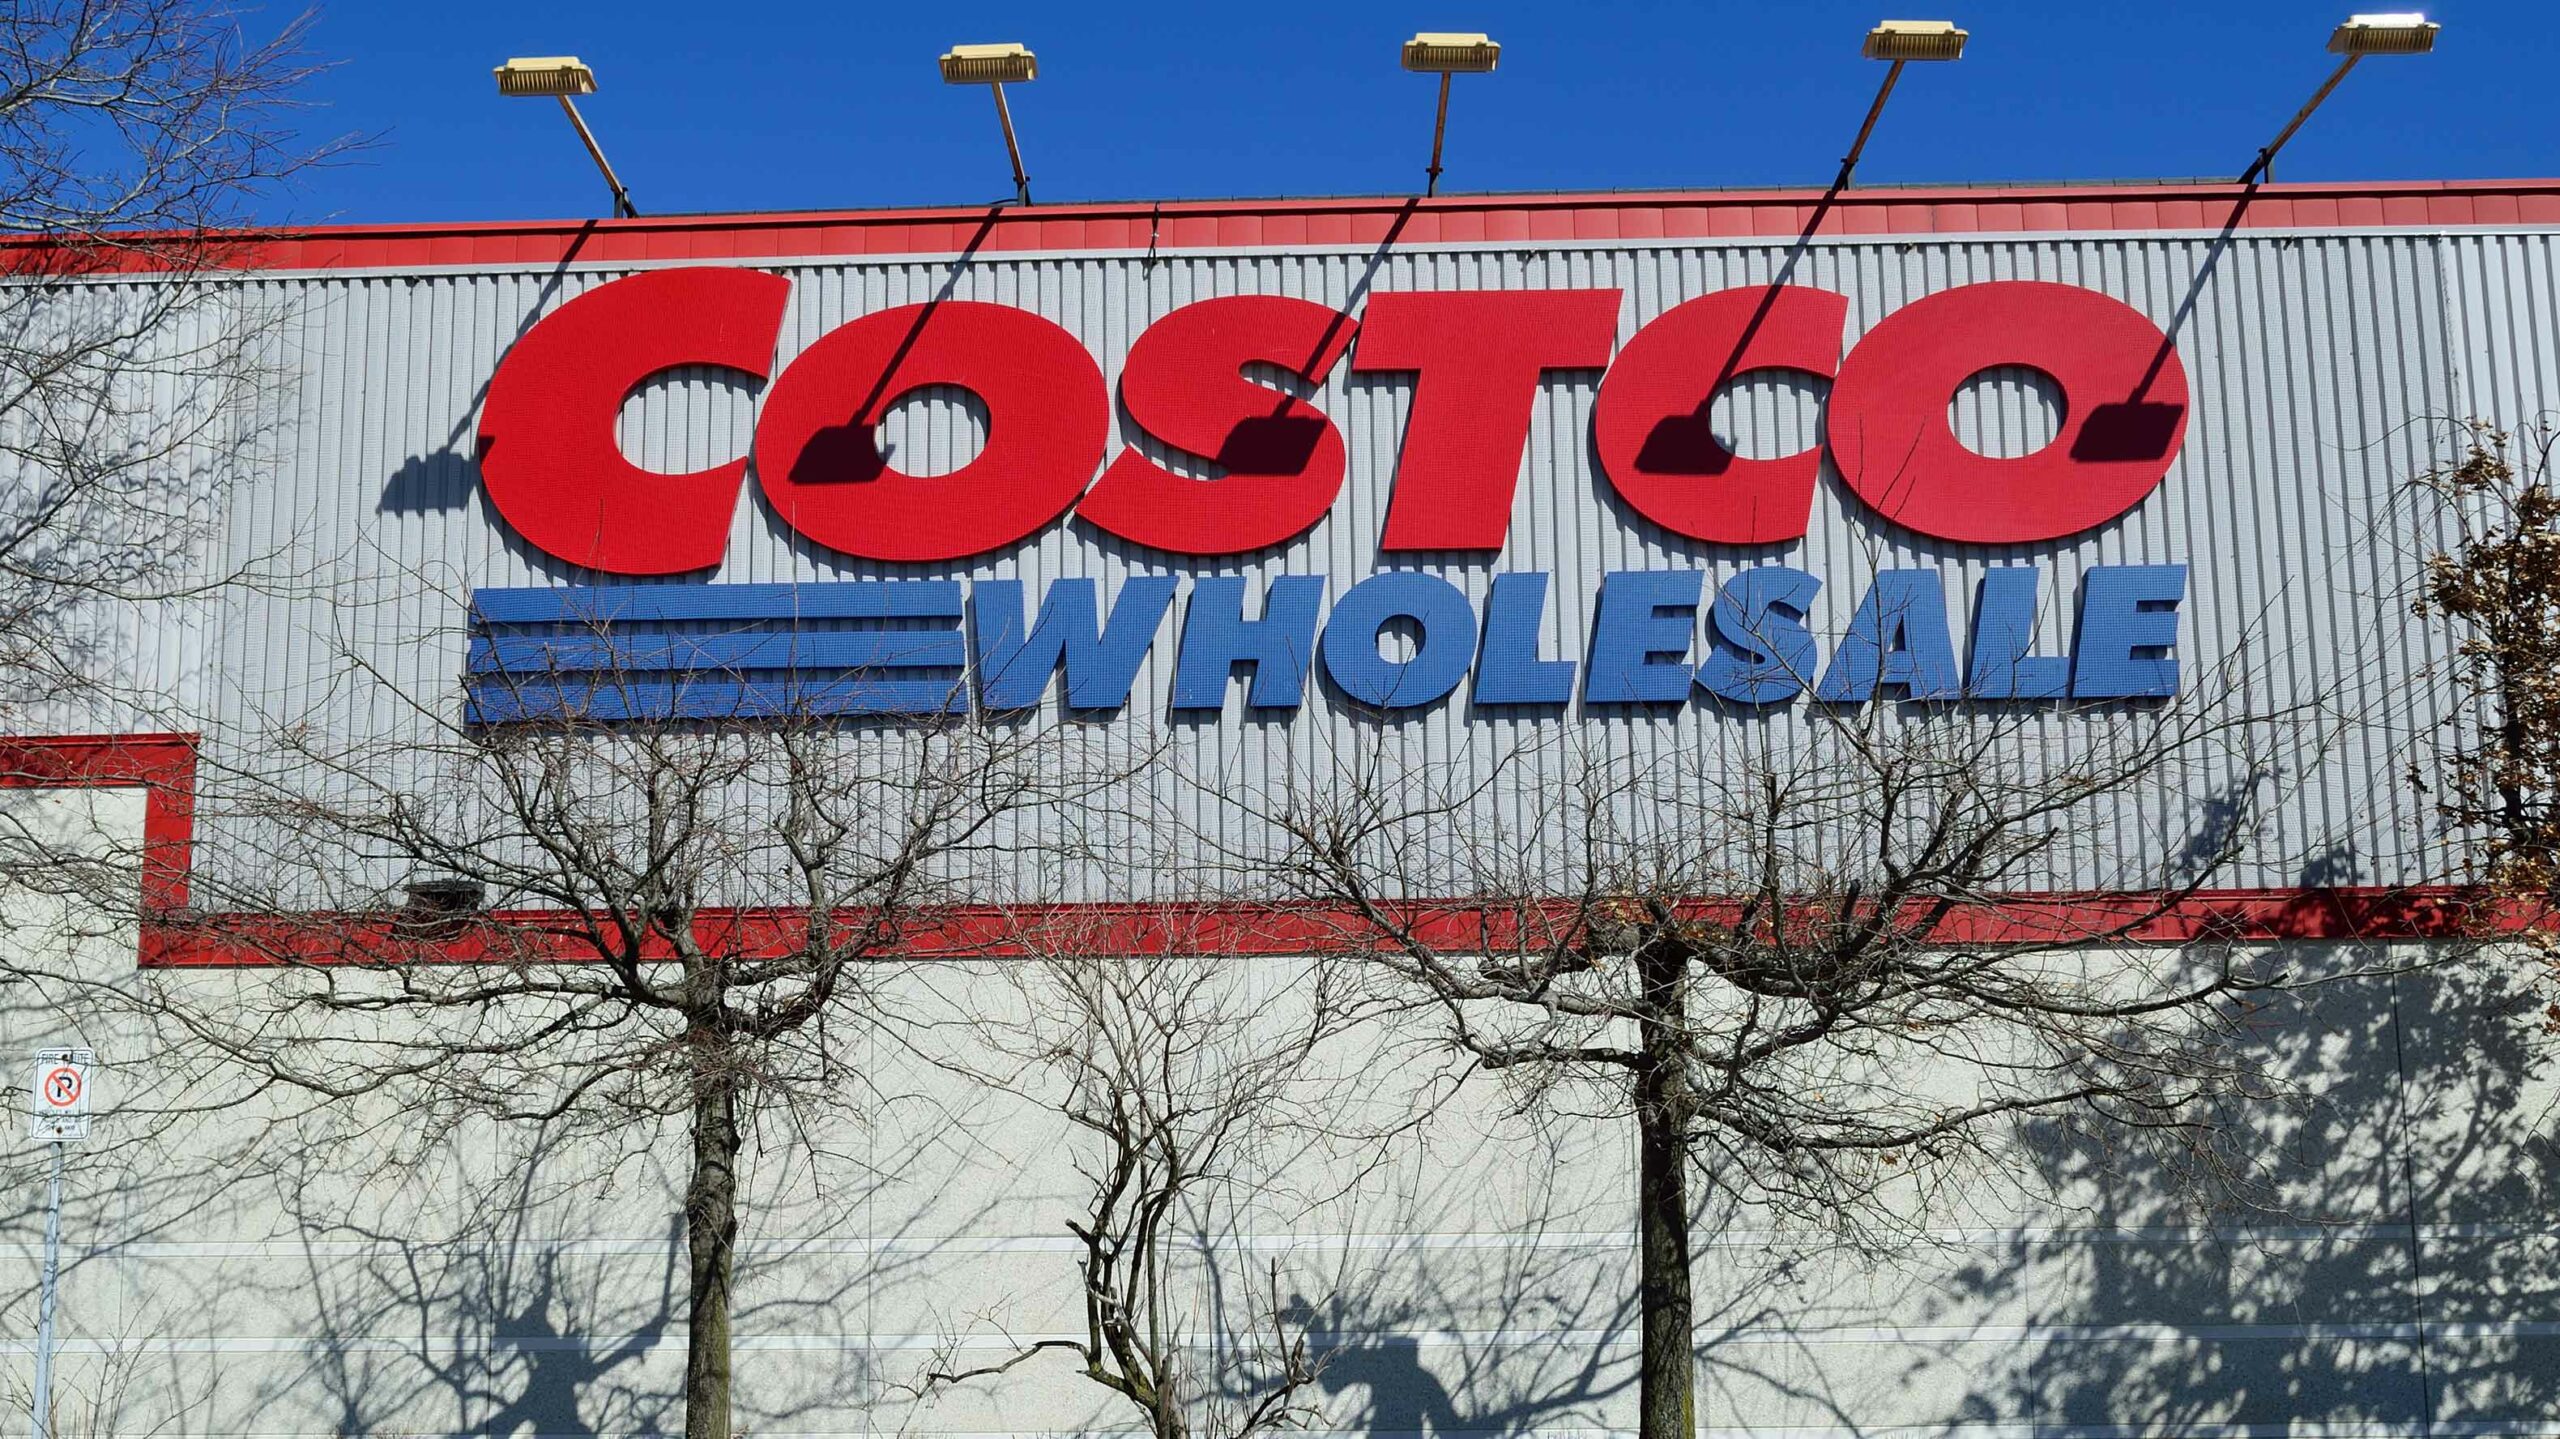 Costco Canada Resumes Apple Product Sales with iTunes Gift Cards, iPads,  iPods [u] • iPhone in Canada Blog